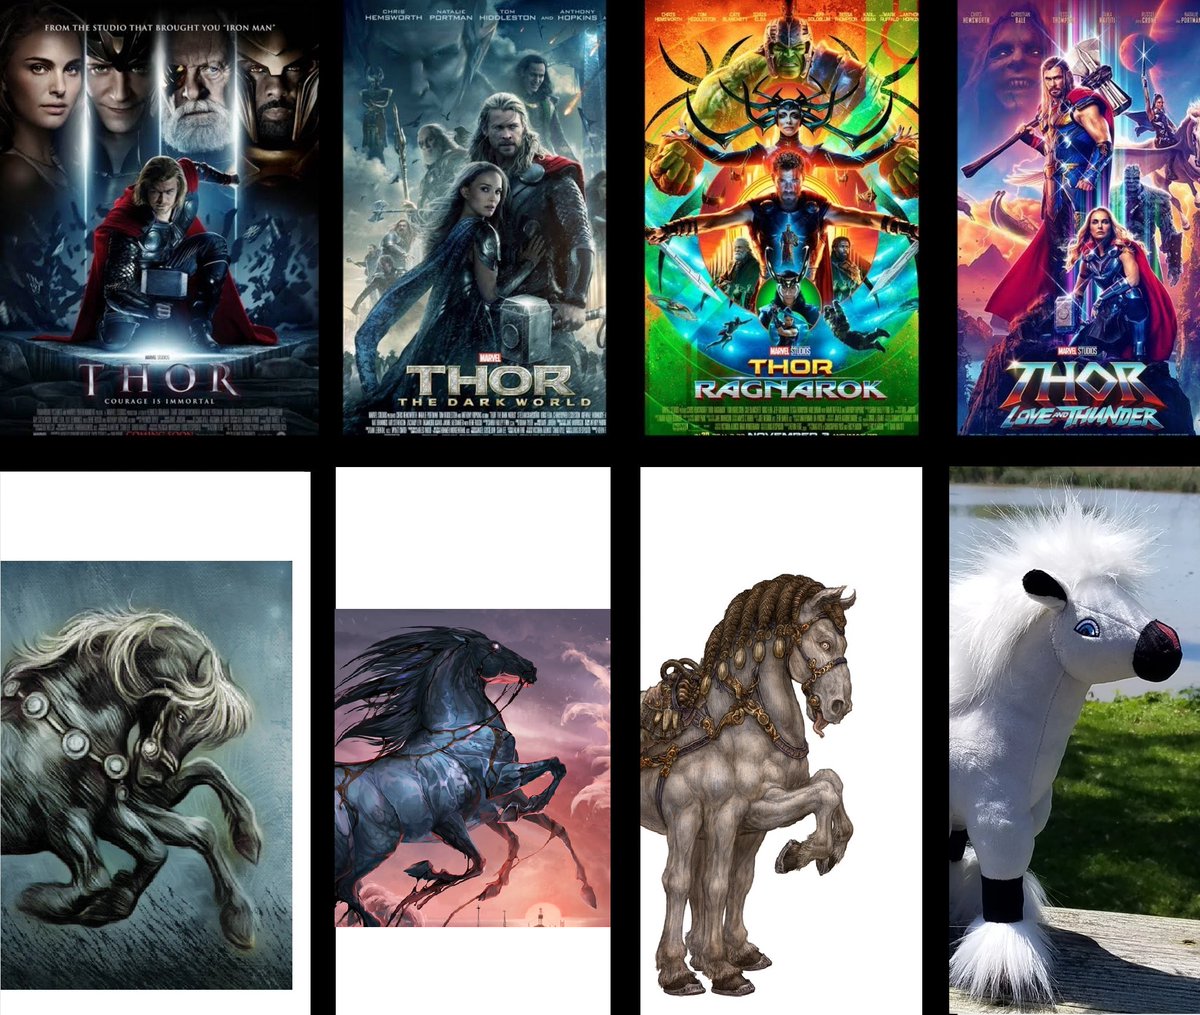 The Thor movie journey: They are all good films just different. They all made money and have positive audience scores. Only on the Twit do they catch hate. 
#Thor #TheDarkWorld #Ragnarok #LoveandThunder
#Sleipnir